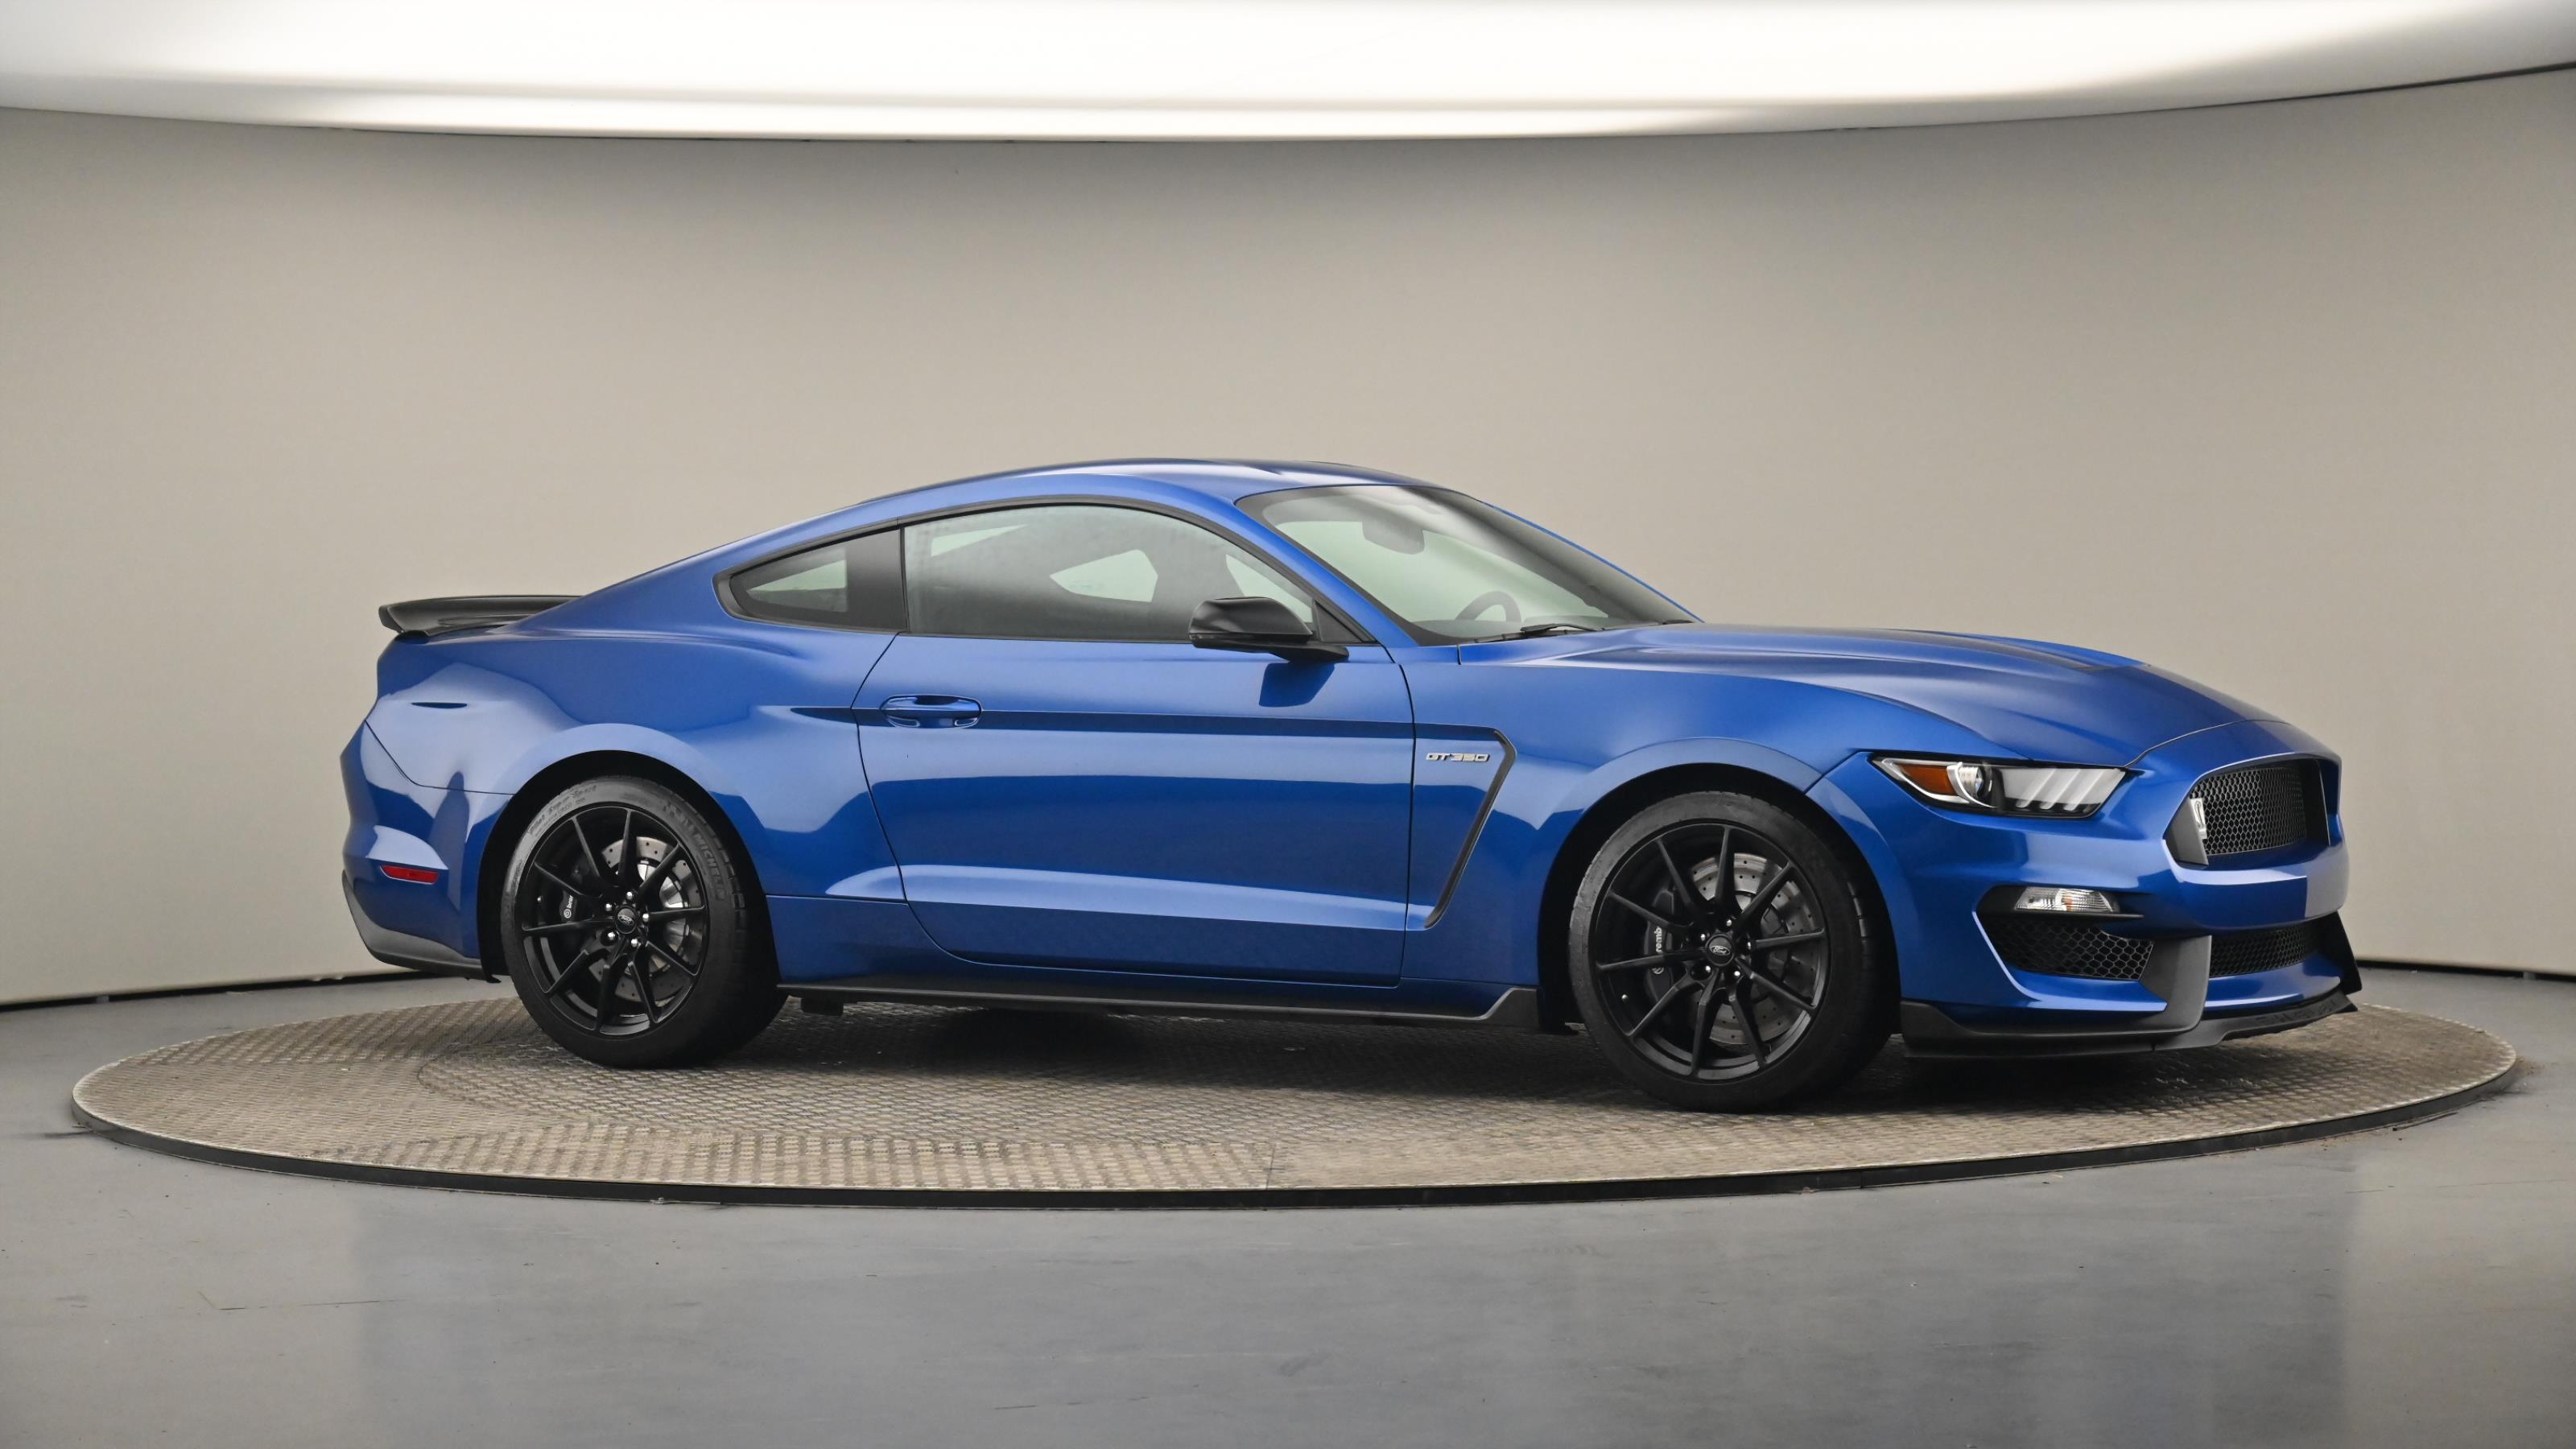 Used 2018 Ford MUSTANG Shelby GT350 £60,000 5,860 miles | Saxton4x4